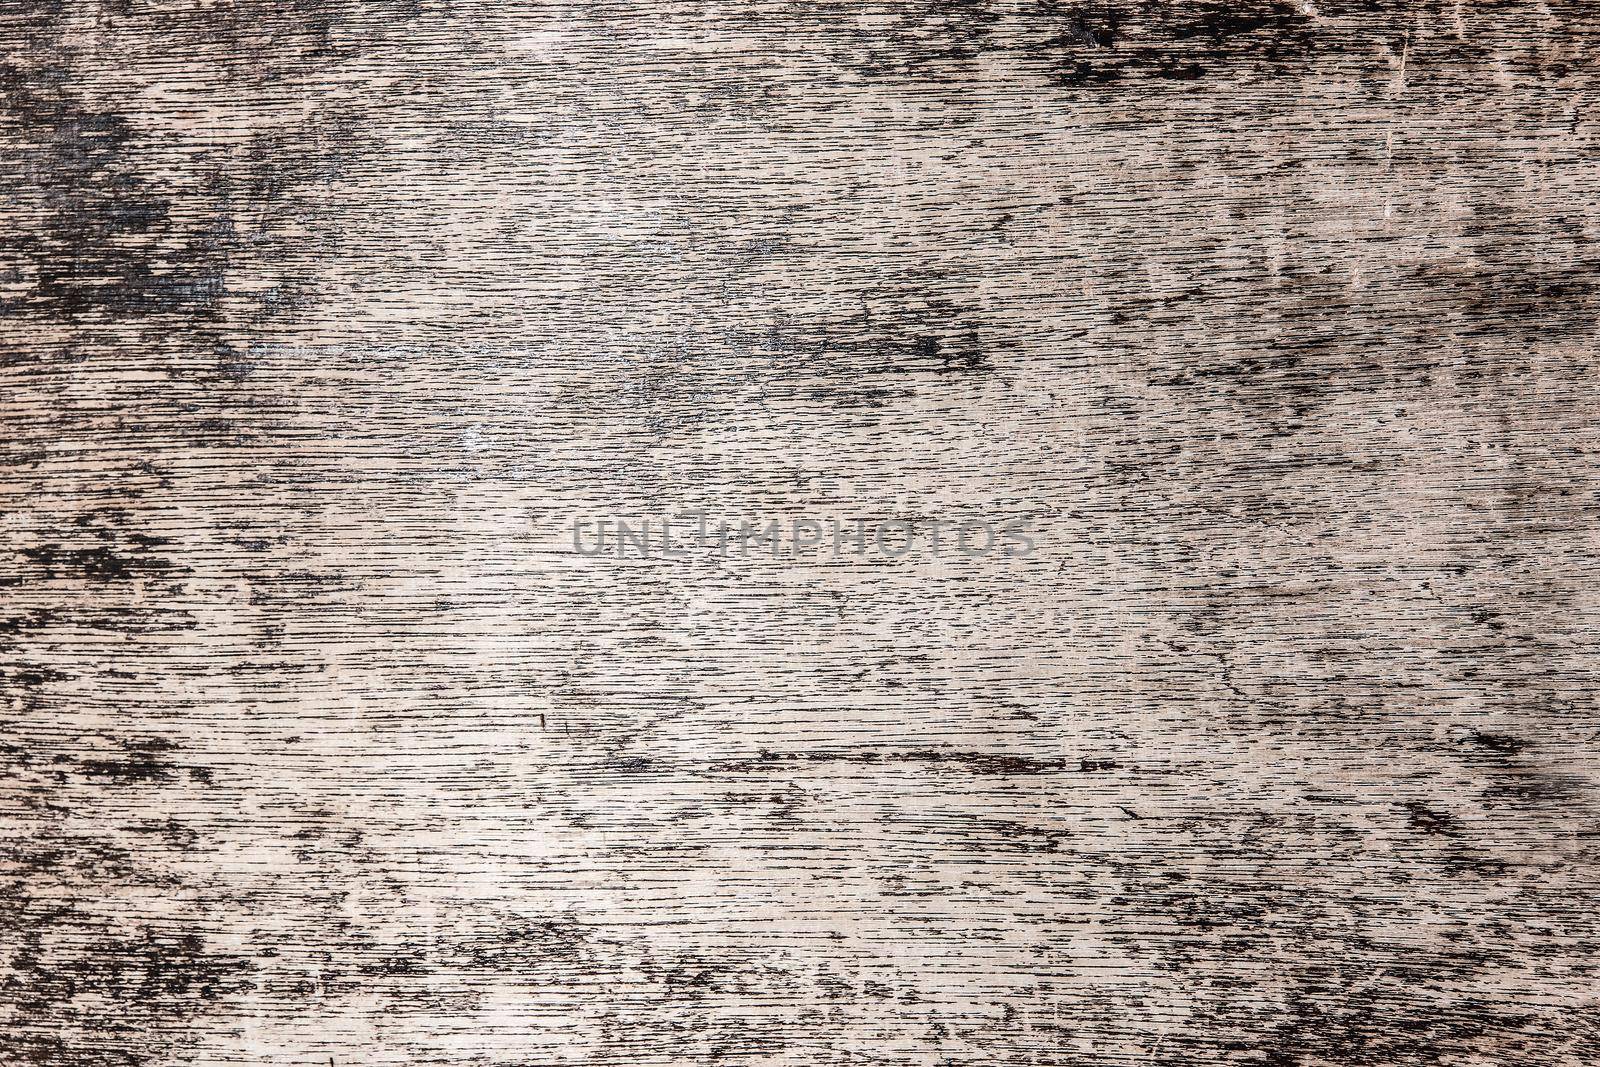 Wooden background texture - wood surface